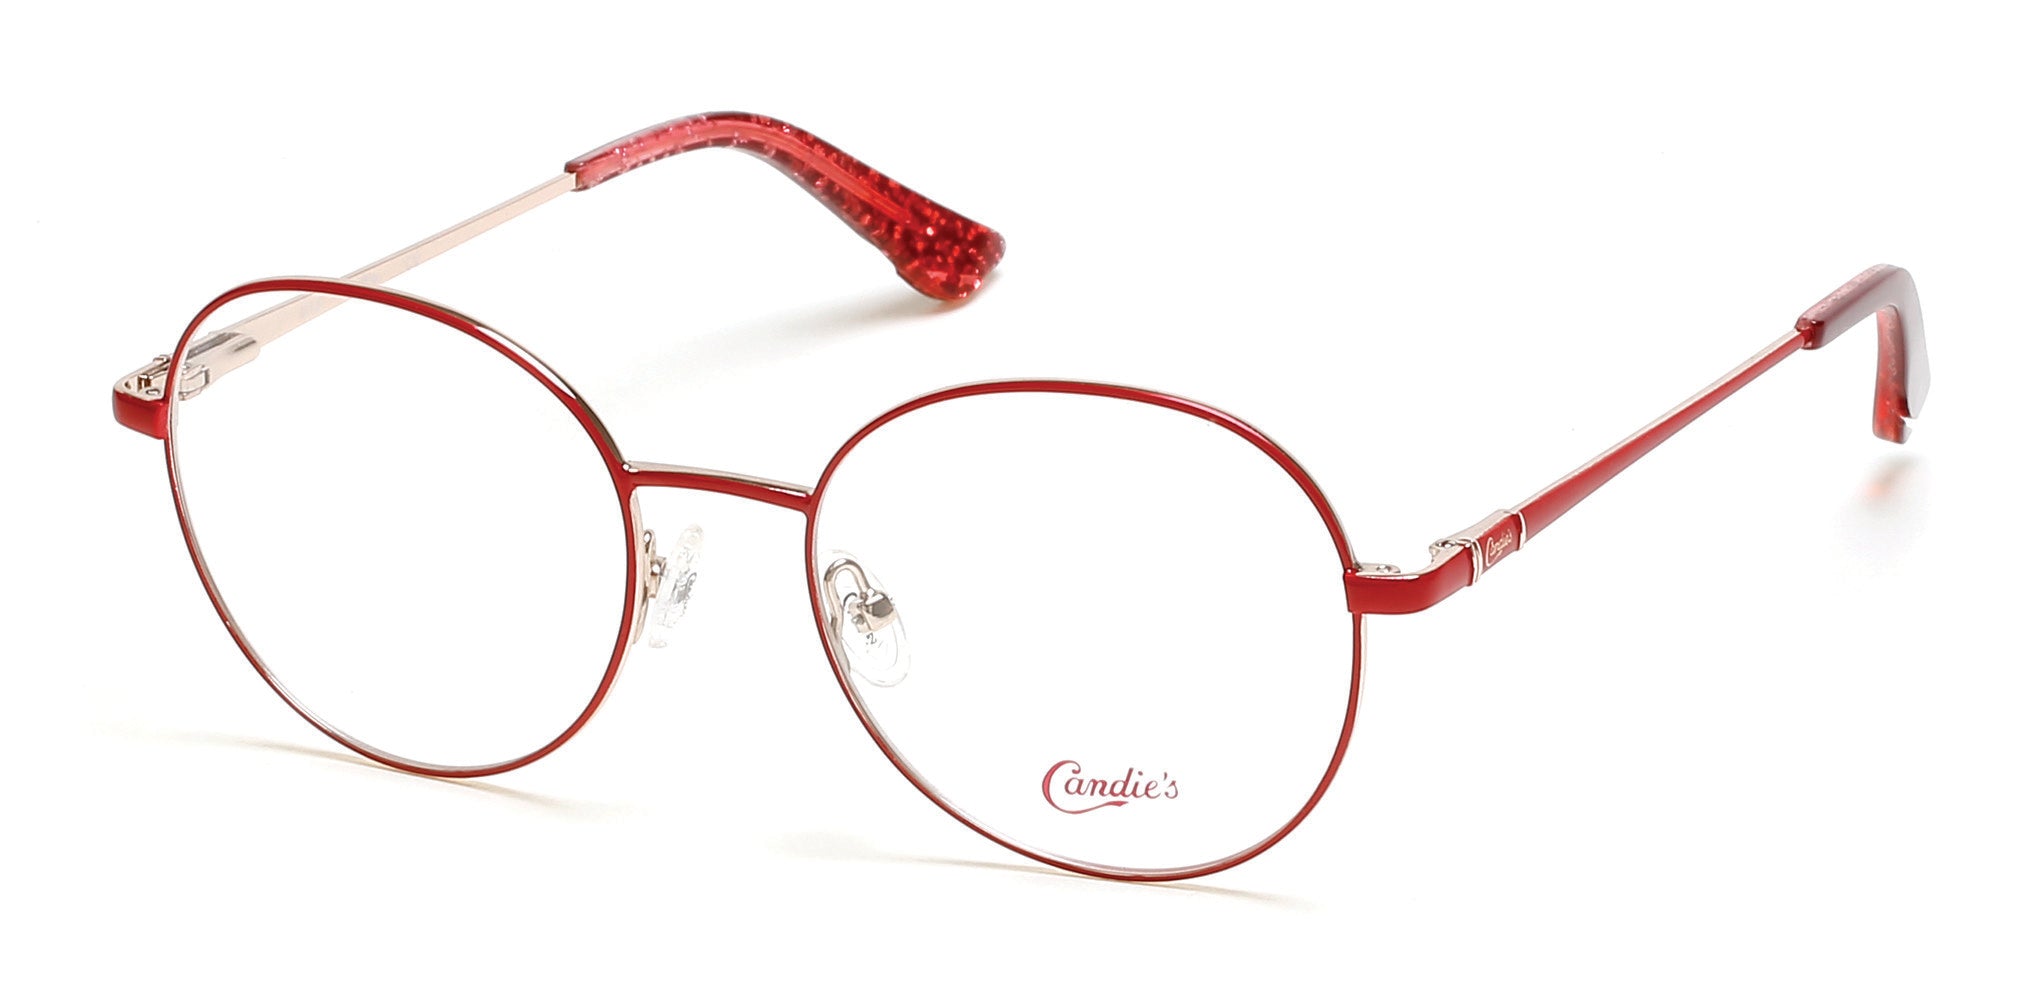 Candies CA0167 Oval Eyeglasses 066-066 - Shiny Red